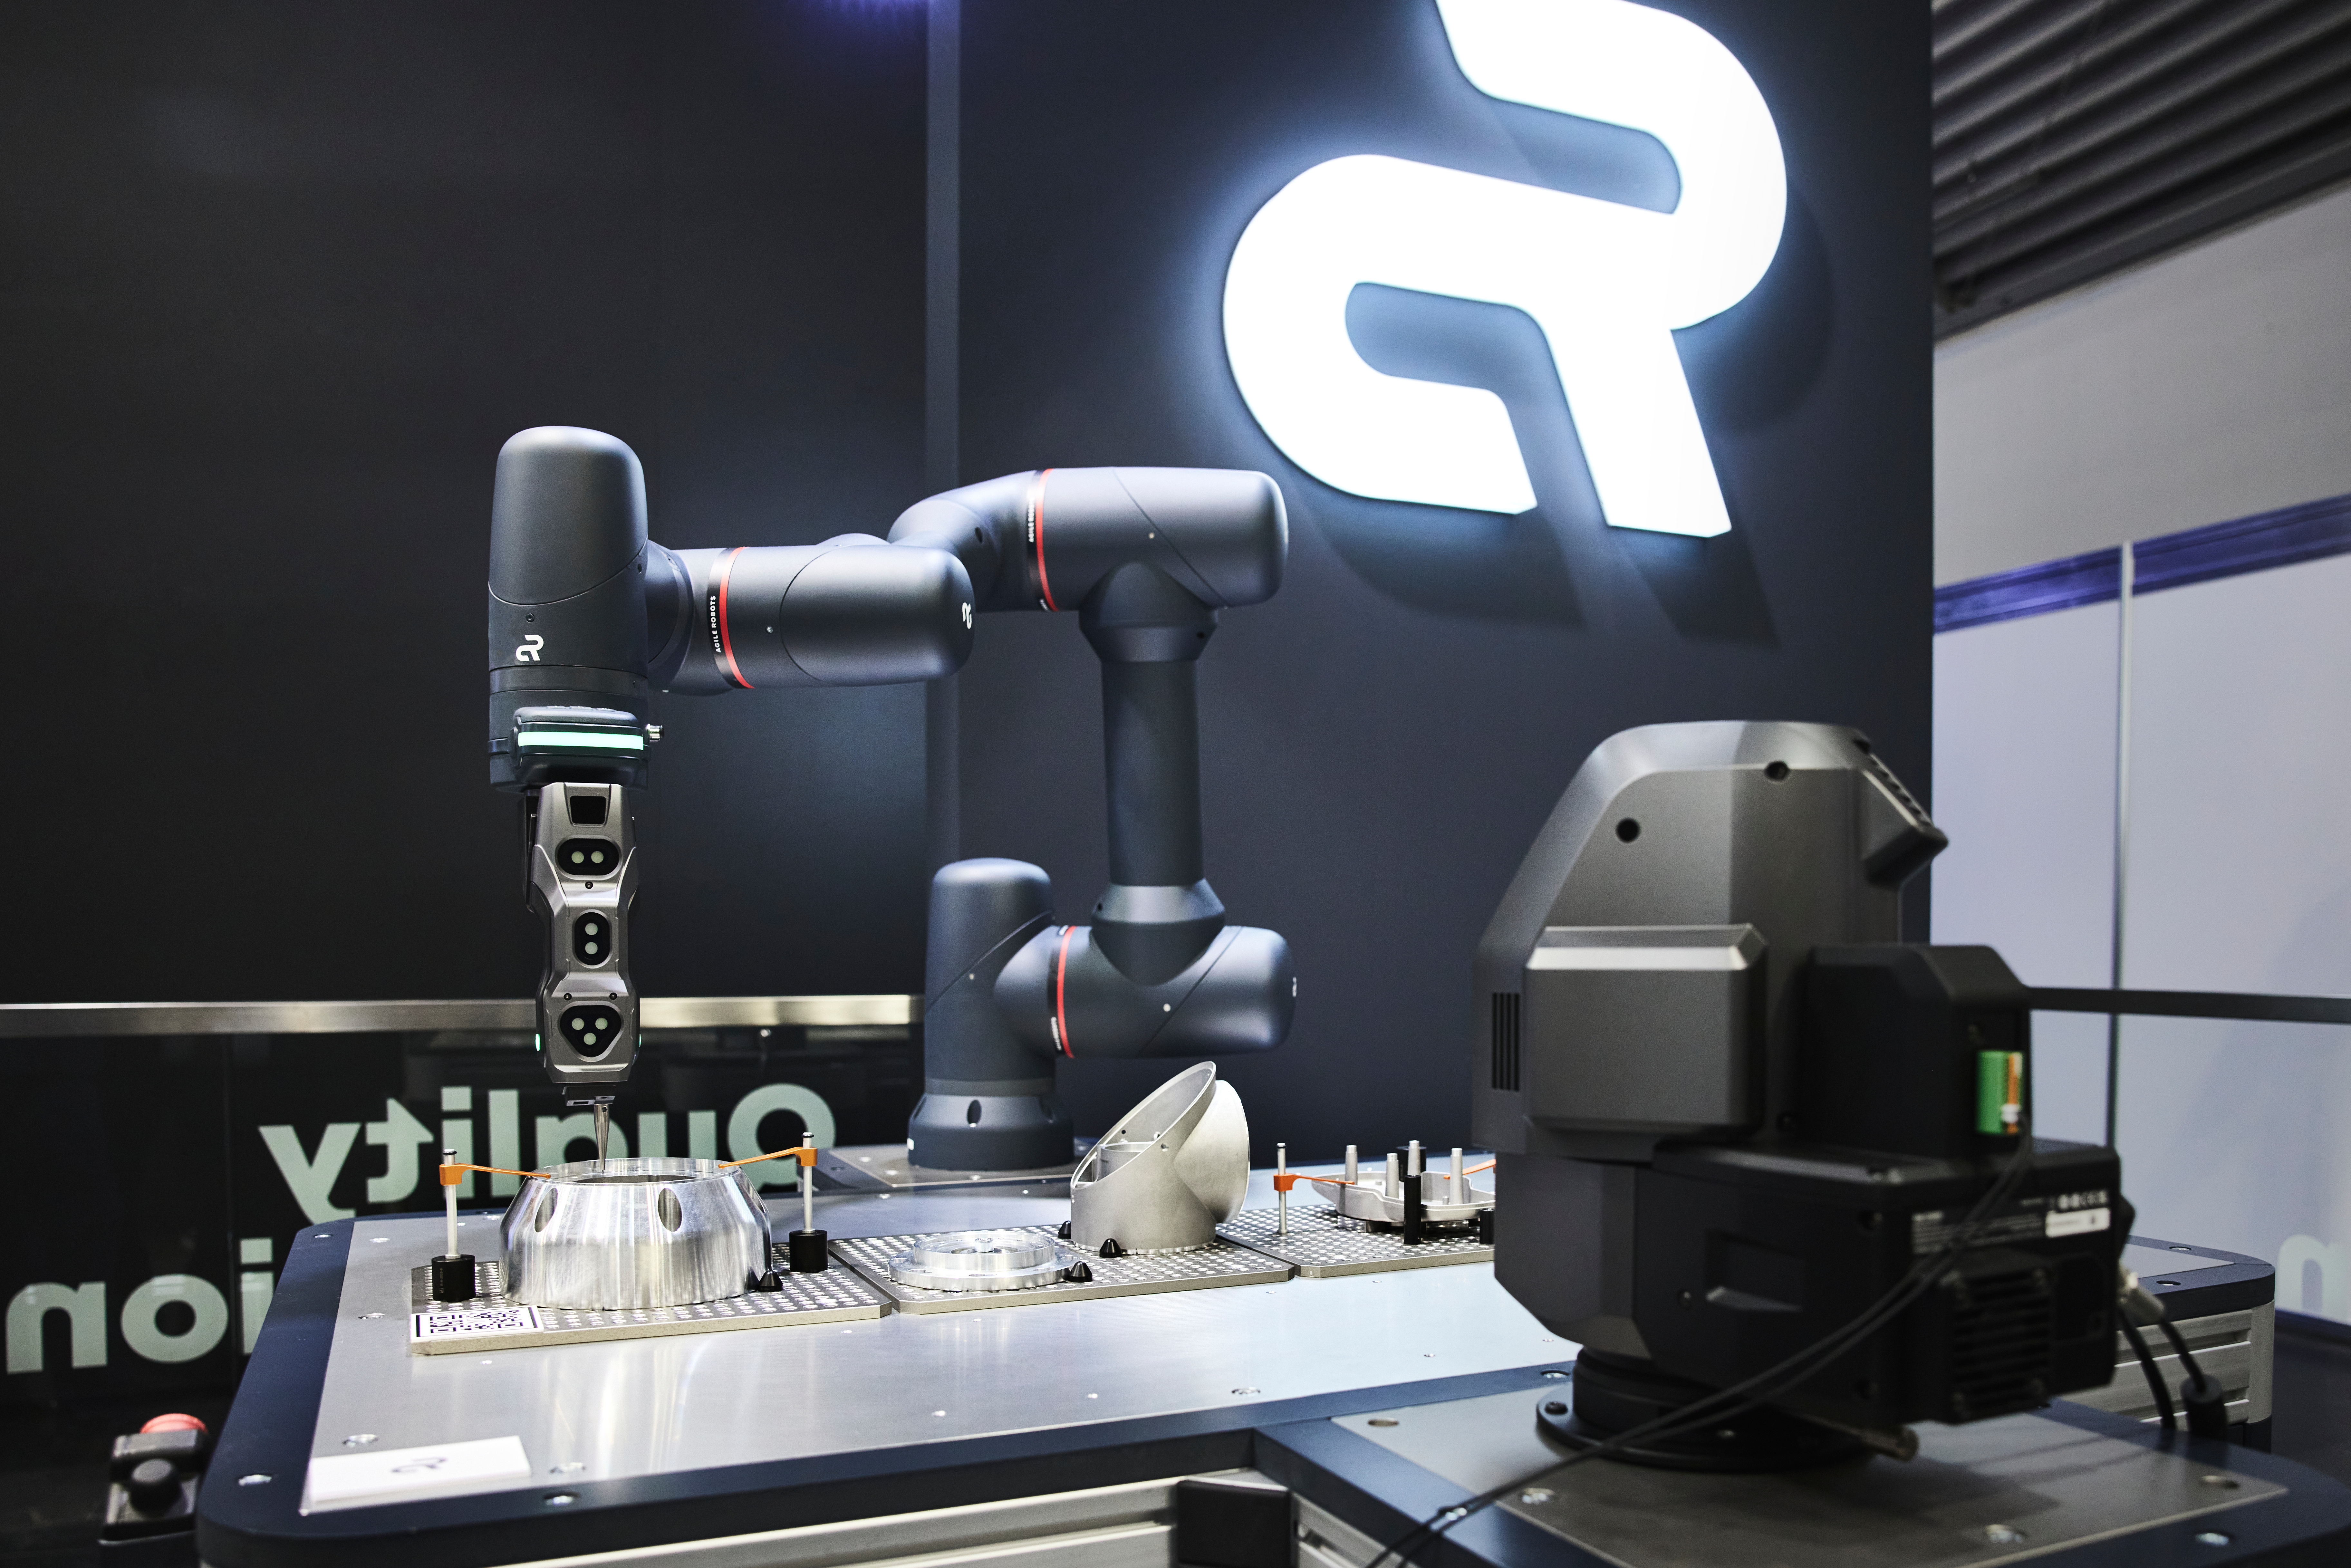 The robot Yu 5 Industrial precisely measures different parts in a quality inspection task